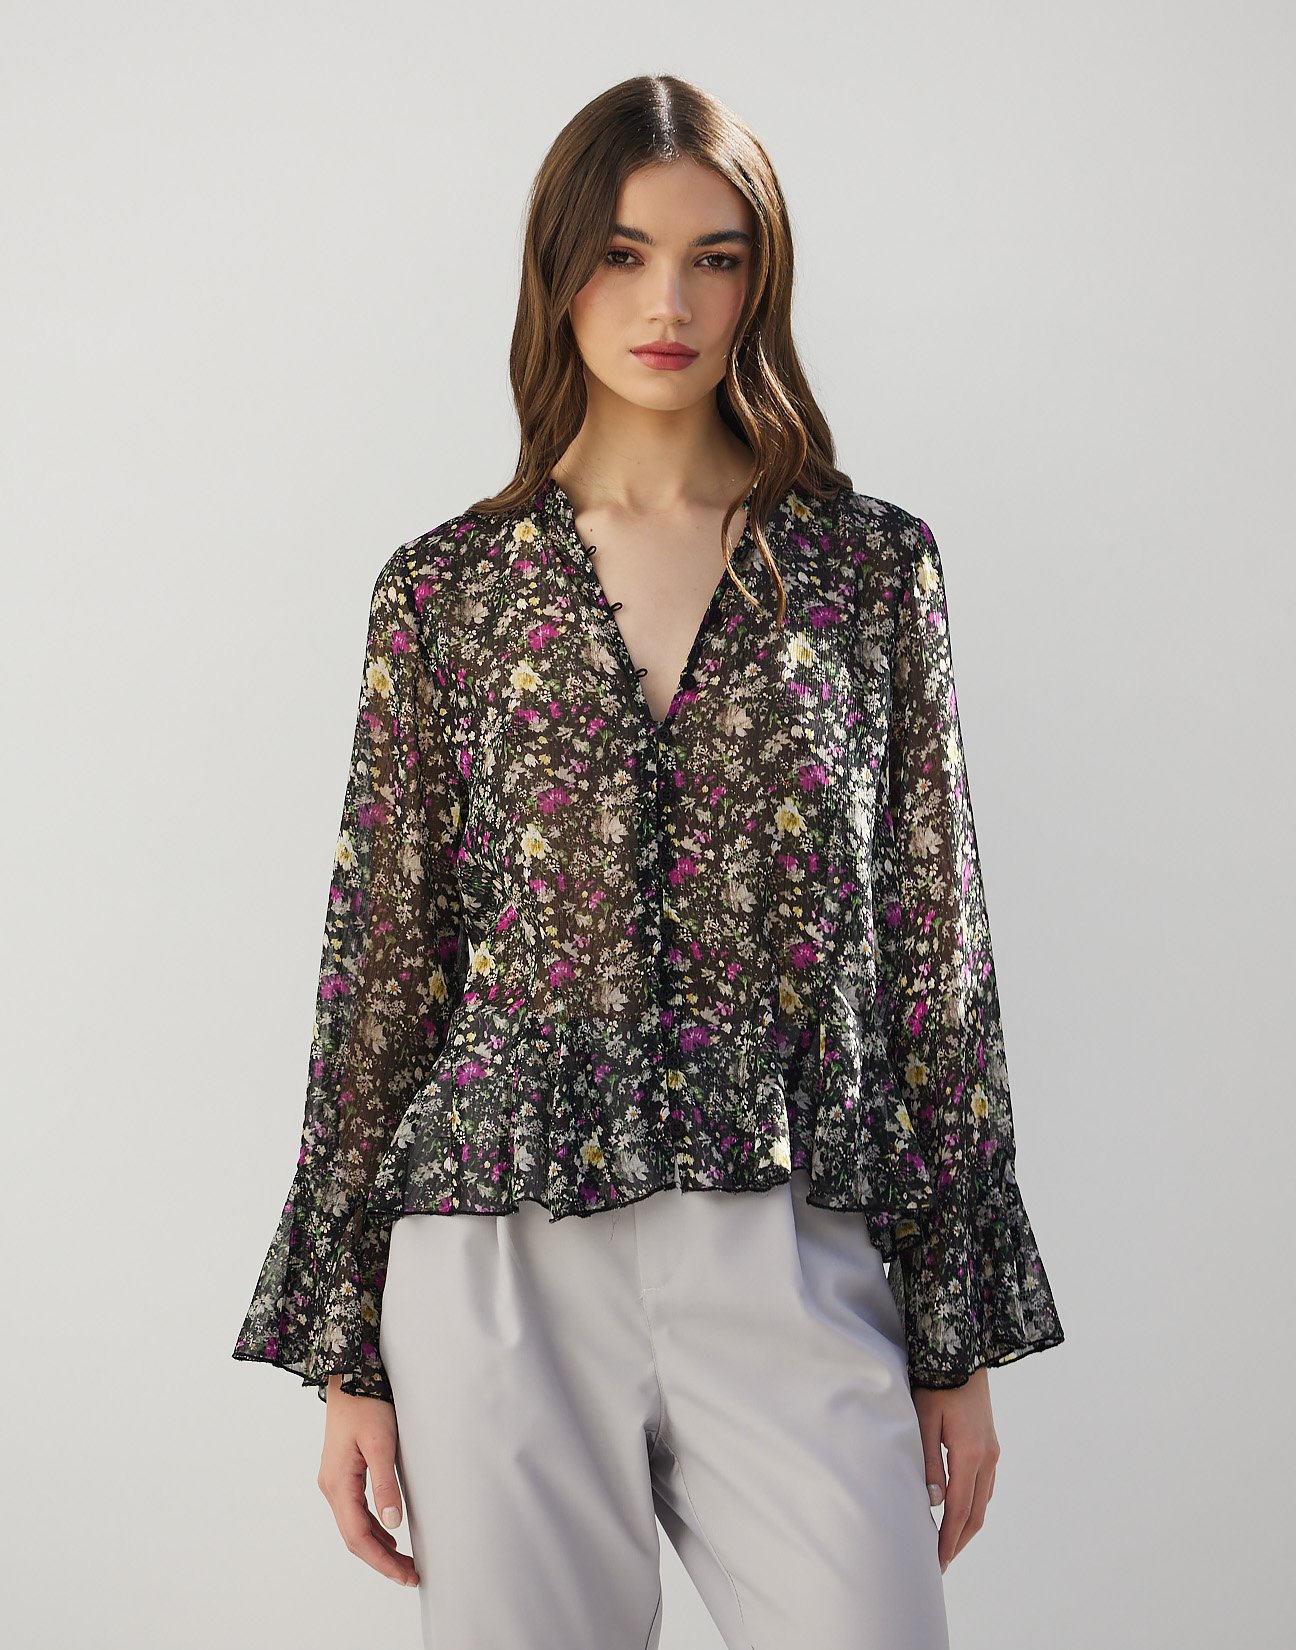 Printed top with ruffles